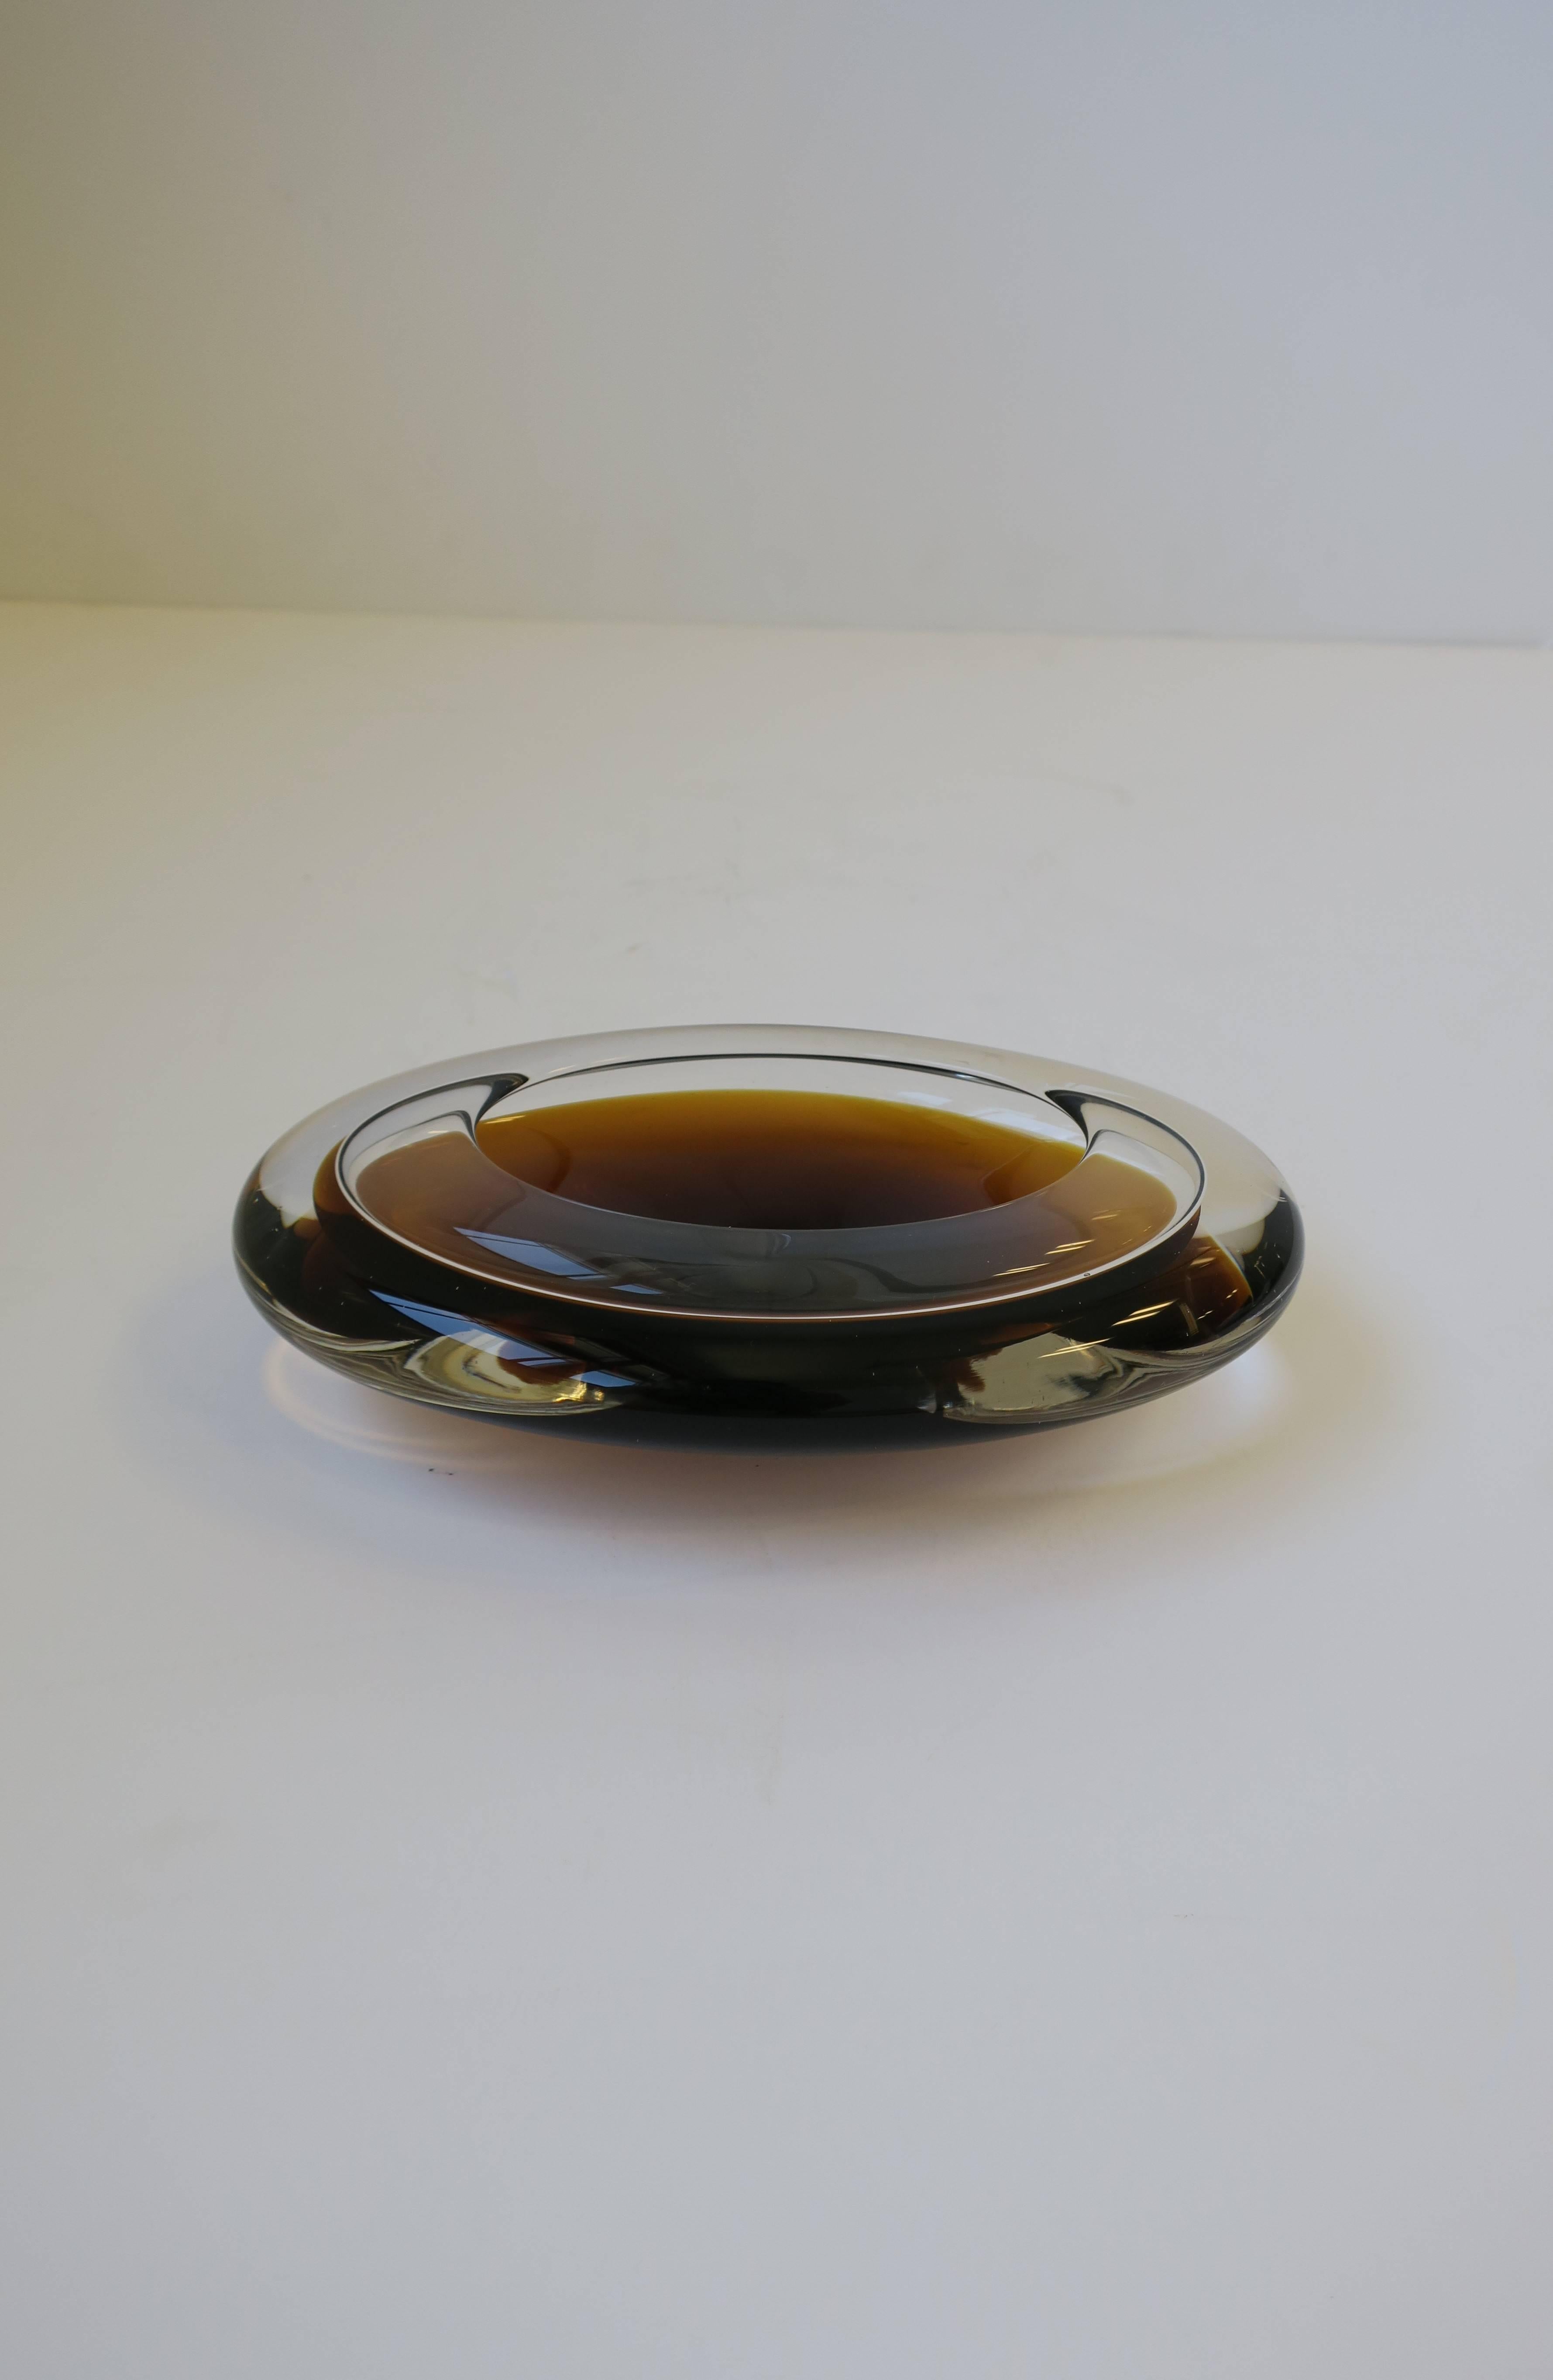 A beautiful, chic and substantial oval European 1970s Modern art glass bowl. Glass bowl is hand-blown; colors include clear glass mixed with an amber or chocolate brown glass. 

Measures: 6 in. x 3 in. x 2 in H.

Item available here online. By